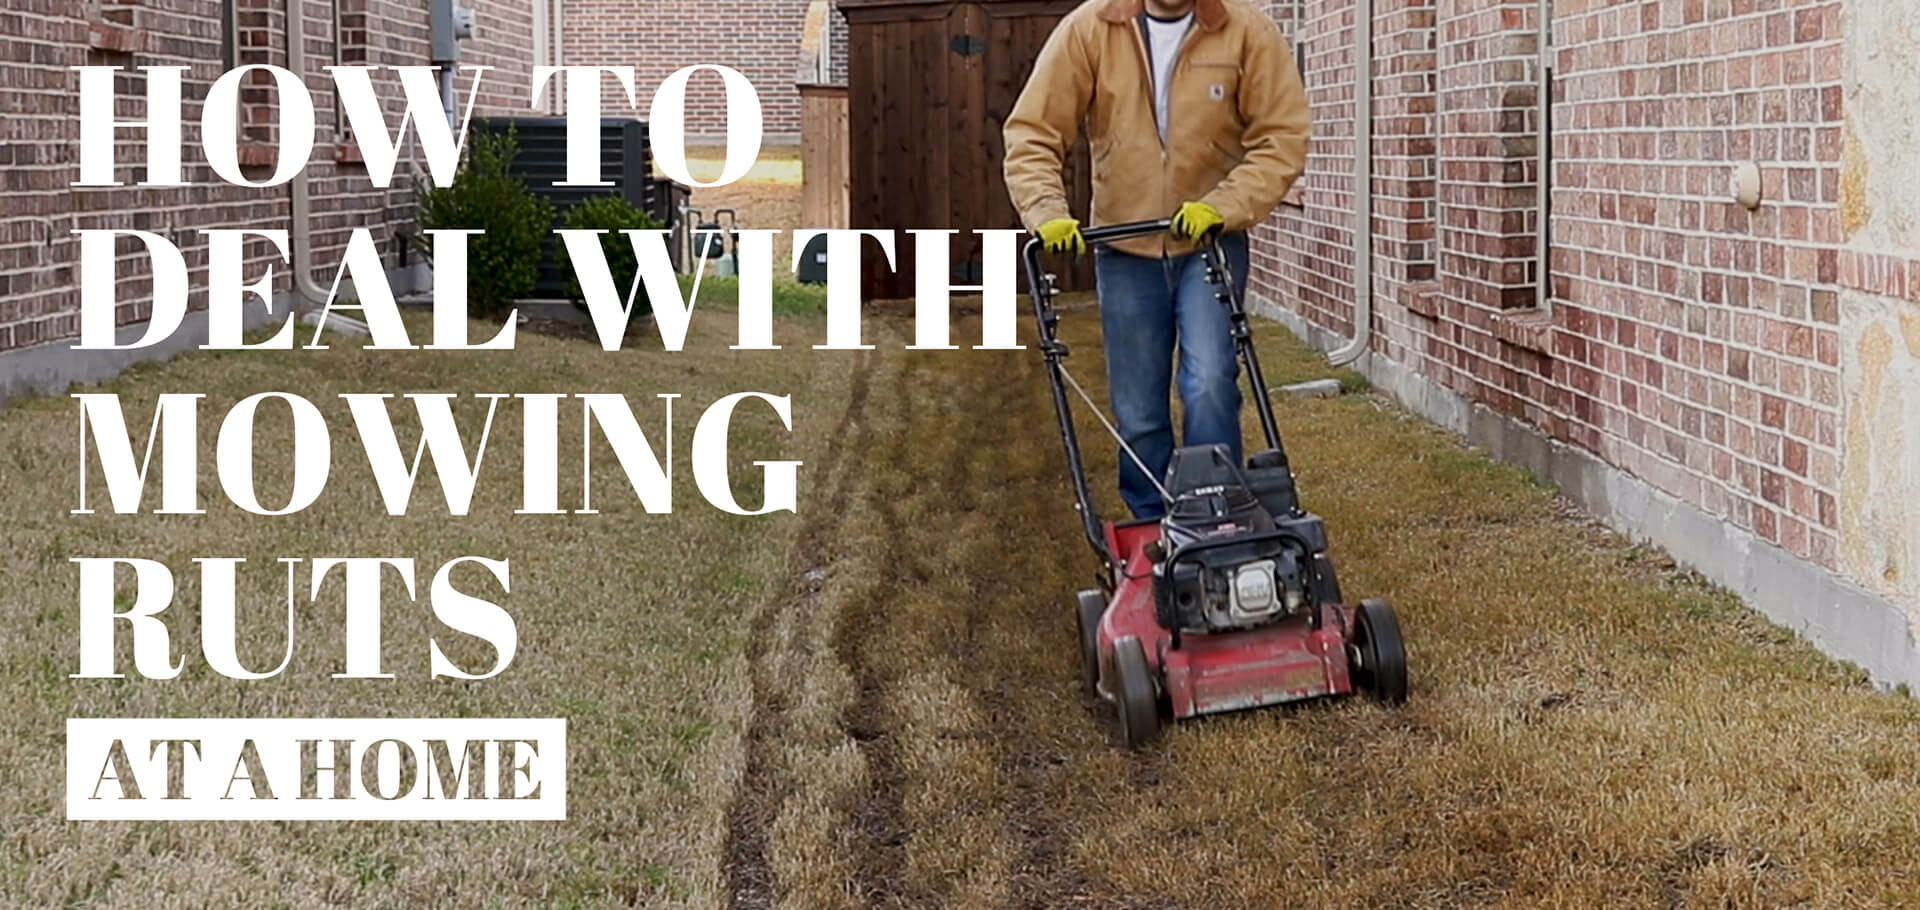 How to deal with mowing ruts at a home